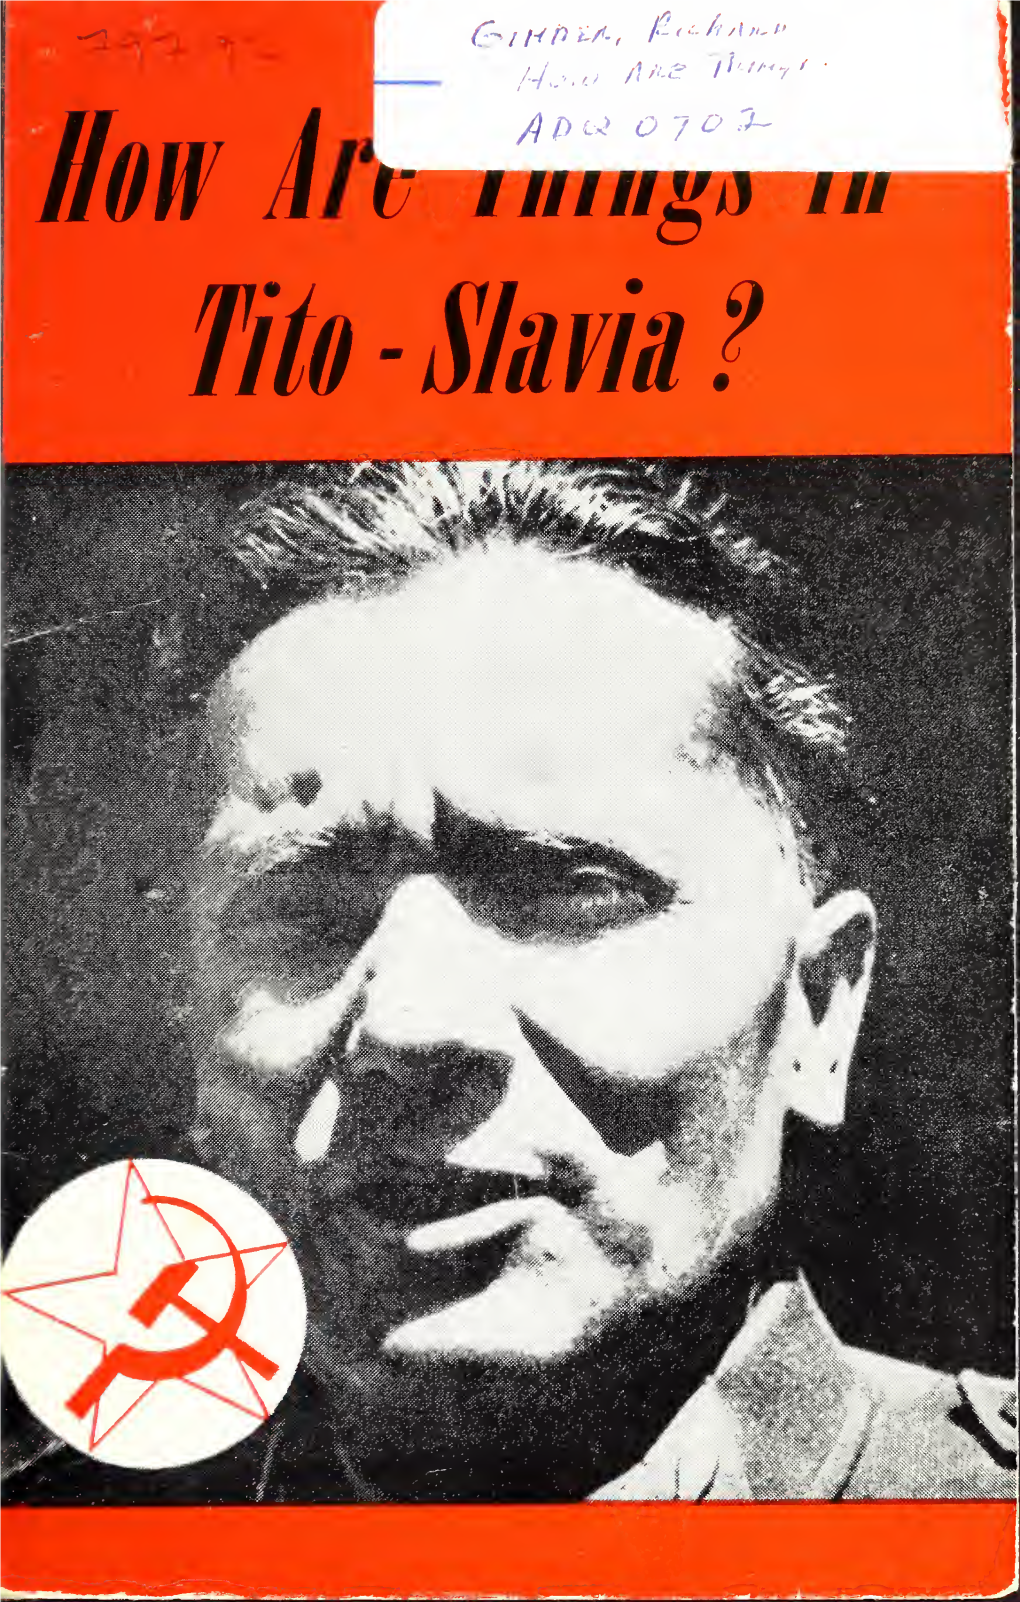 How Are Things in Tito-Slavia?